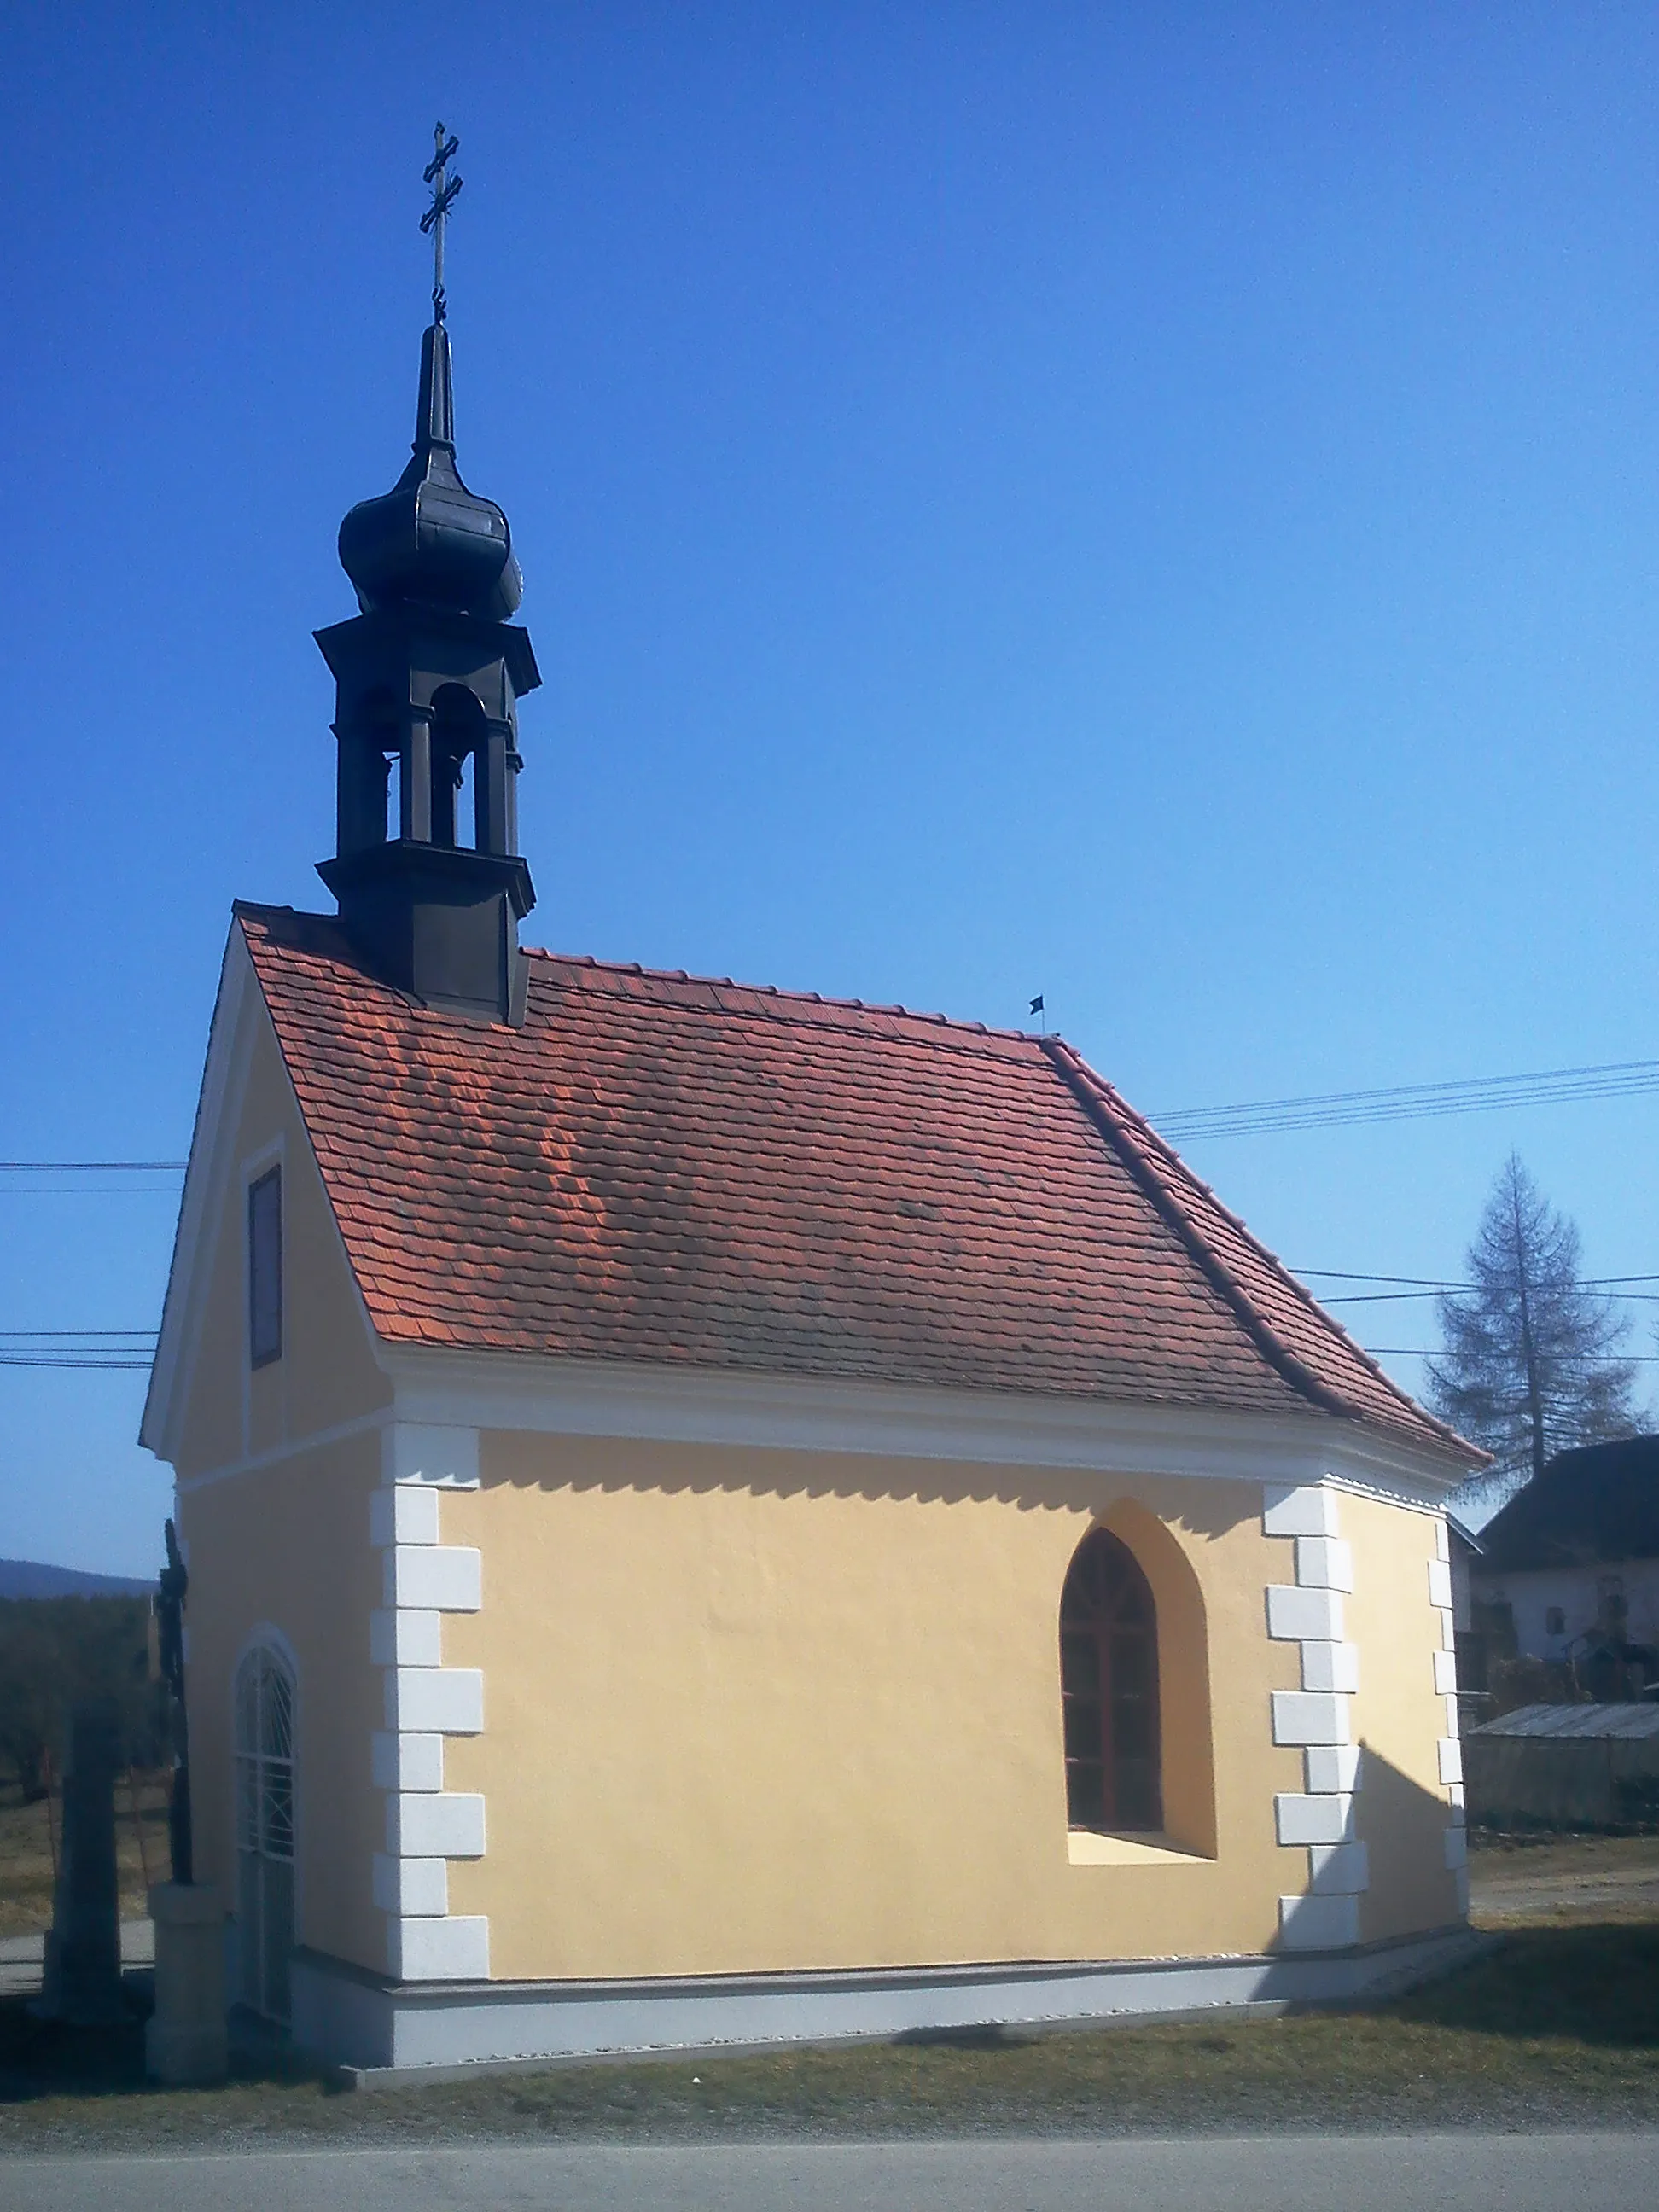 Photo showing: Chapel in the village of Pořešinec, part of the town of Kaplice, South Bohemian Region, Czech Republic.